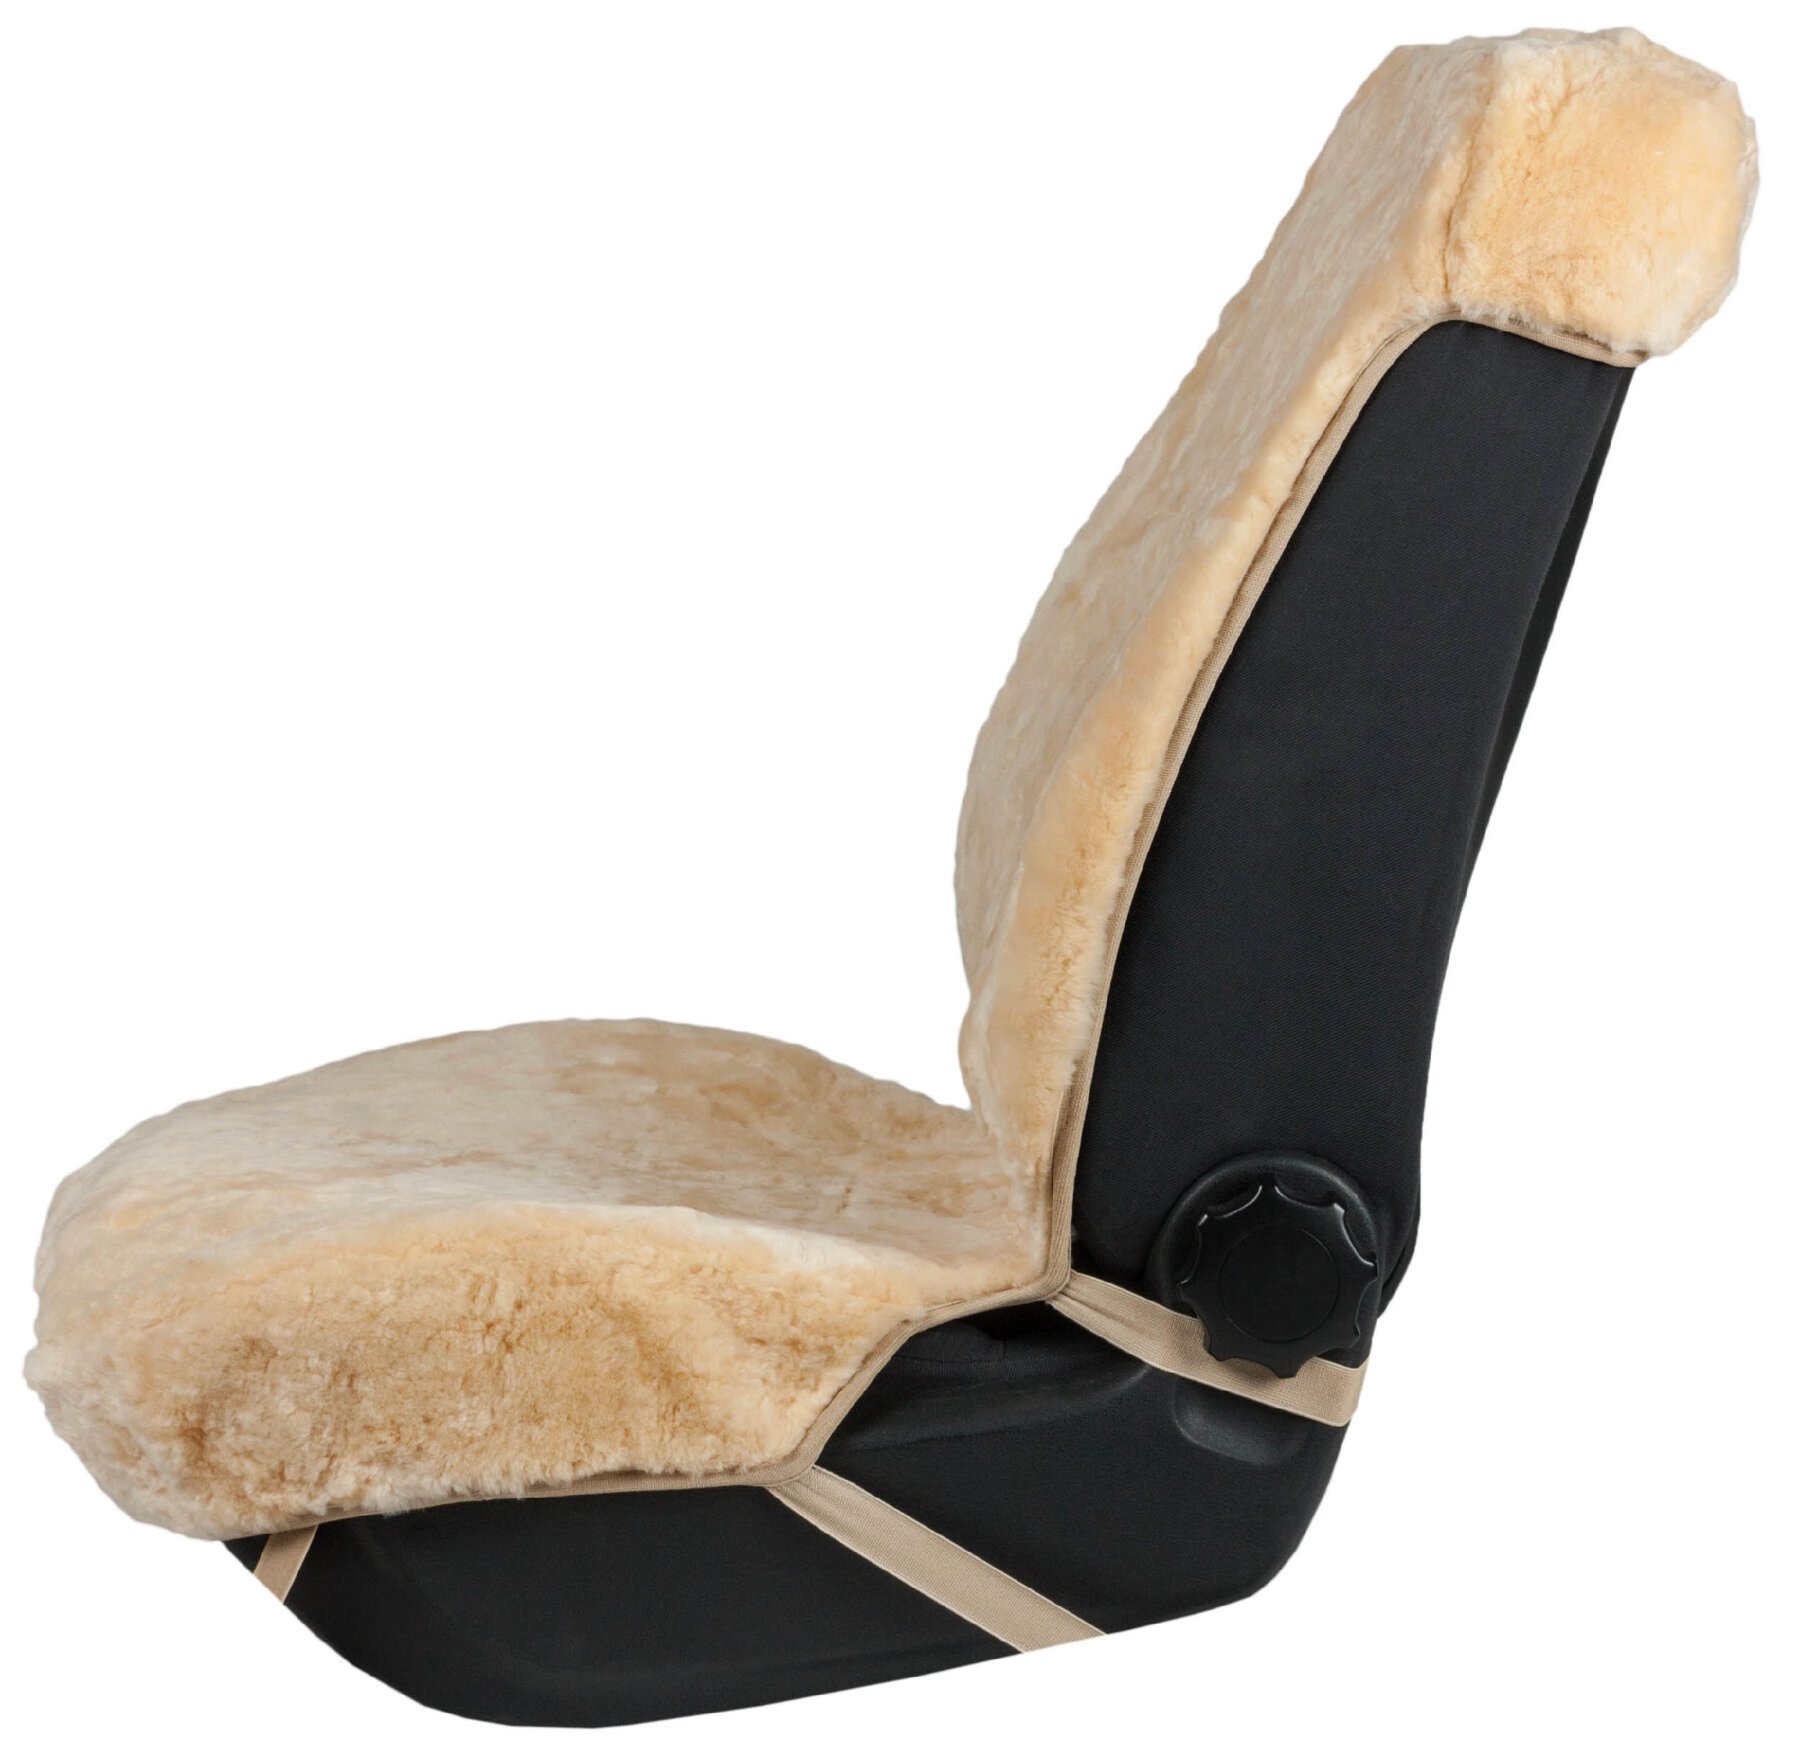 Shauna lambskin car seat cover, 20mm thick wool pile - 1 piece in beige with ZIPP system